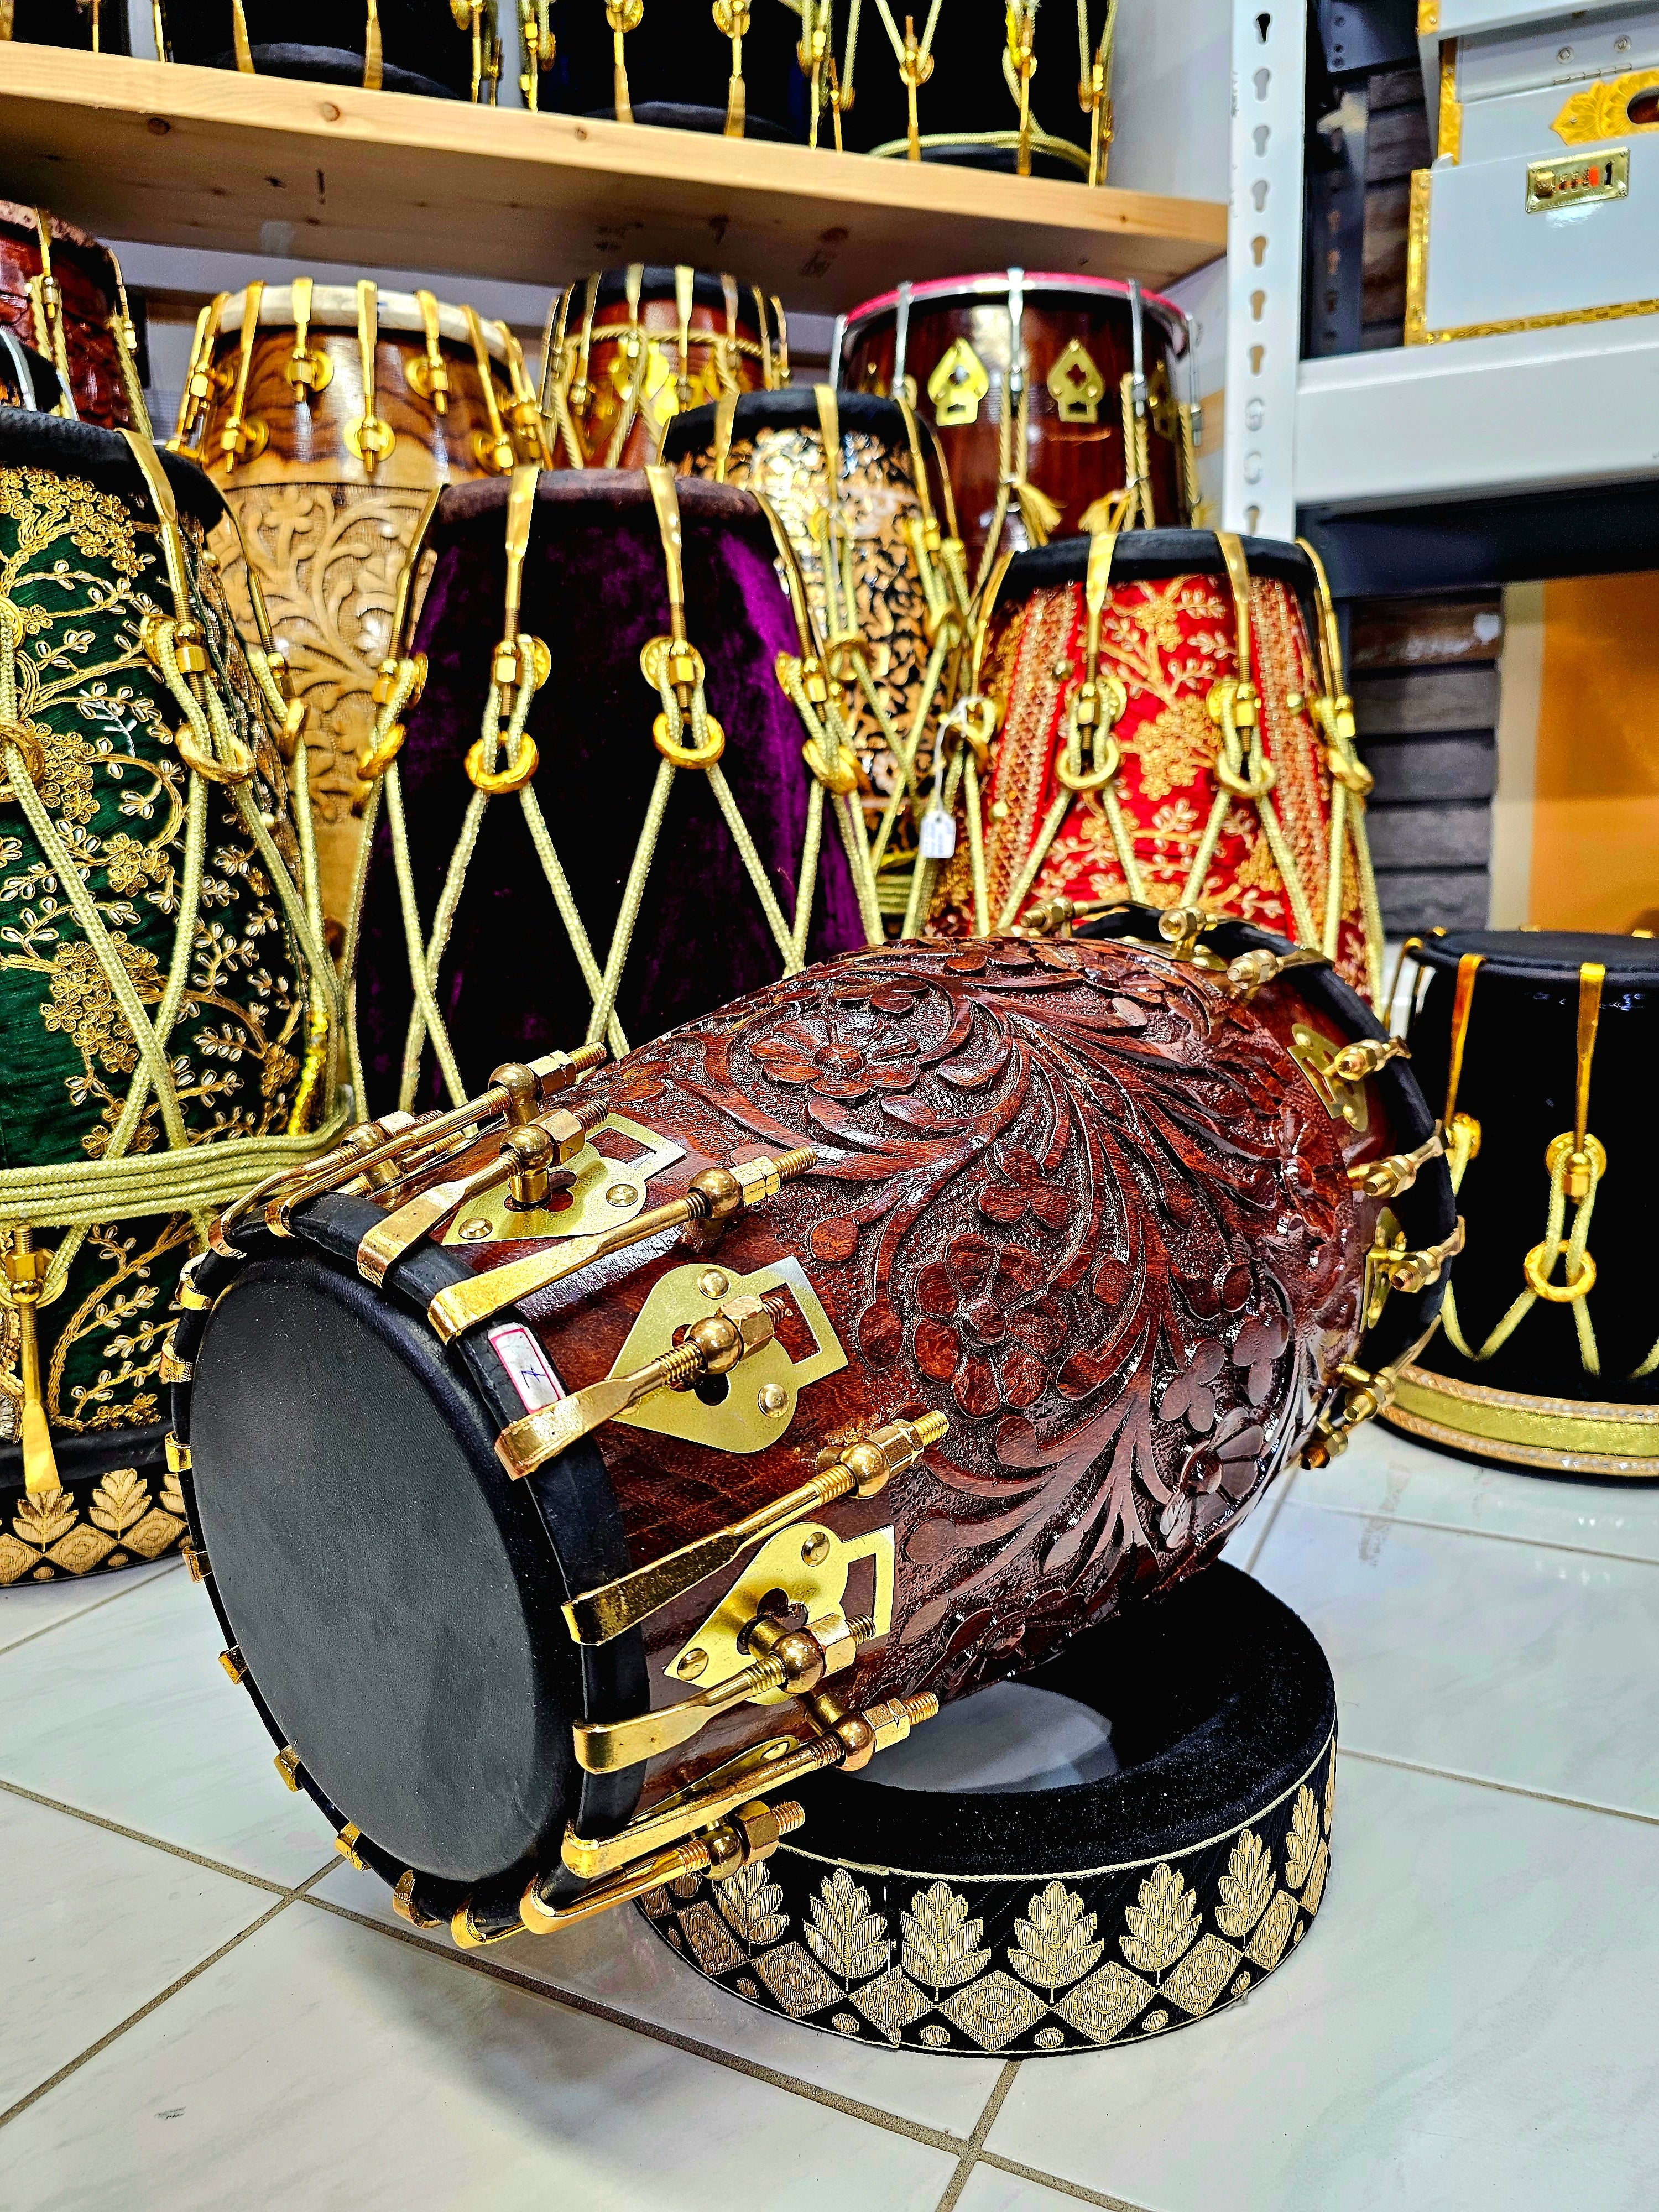 Prem's Florid Echo: Custom Floral Engraved Black Sheesham Dholak with Brass Bolts and Ebony Black Skin (Includes 2 Extra Concert Quality Skins ($50 Each))